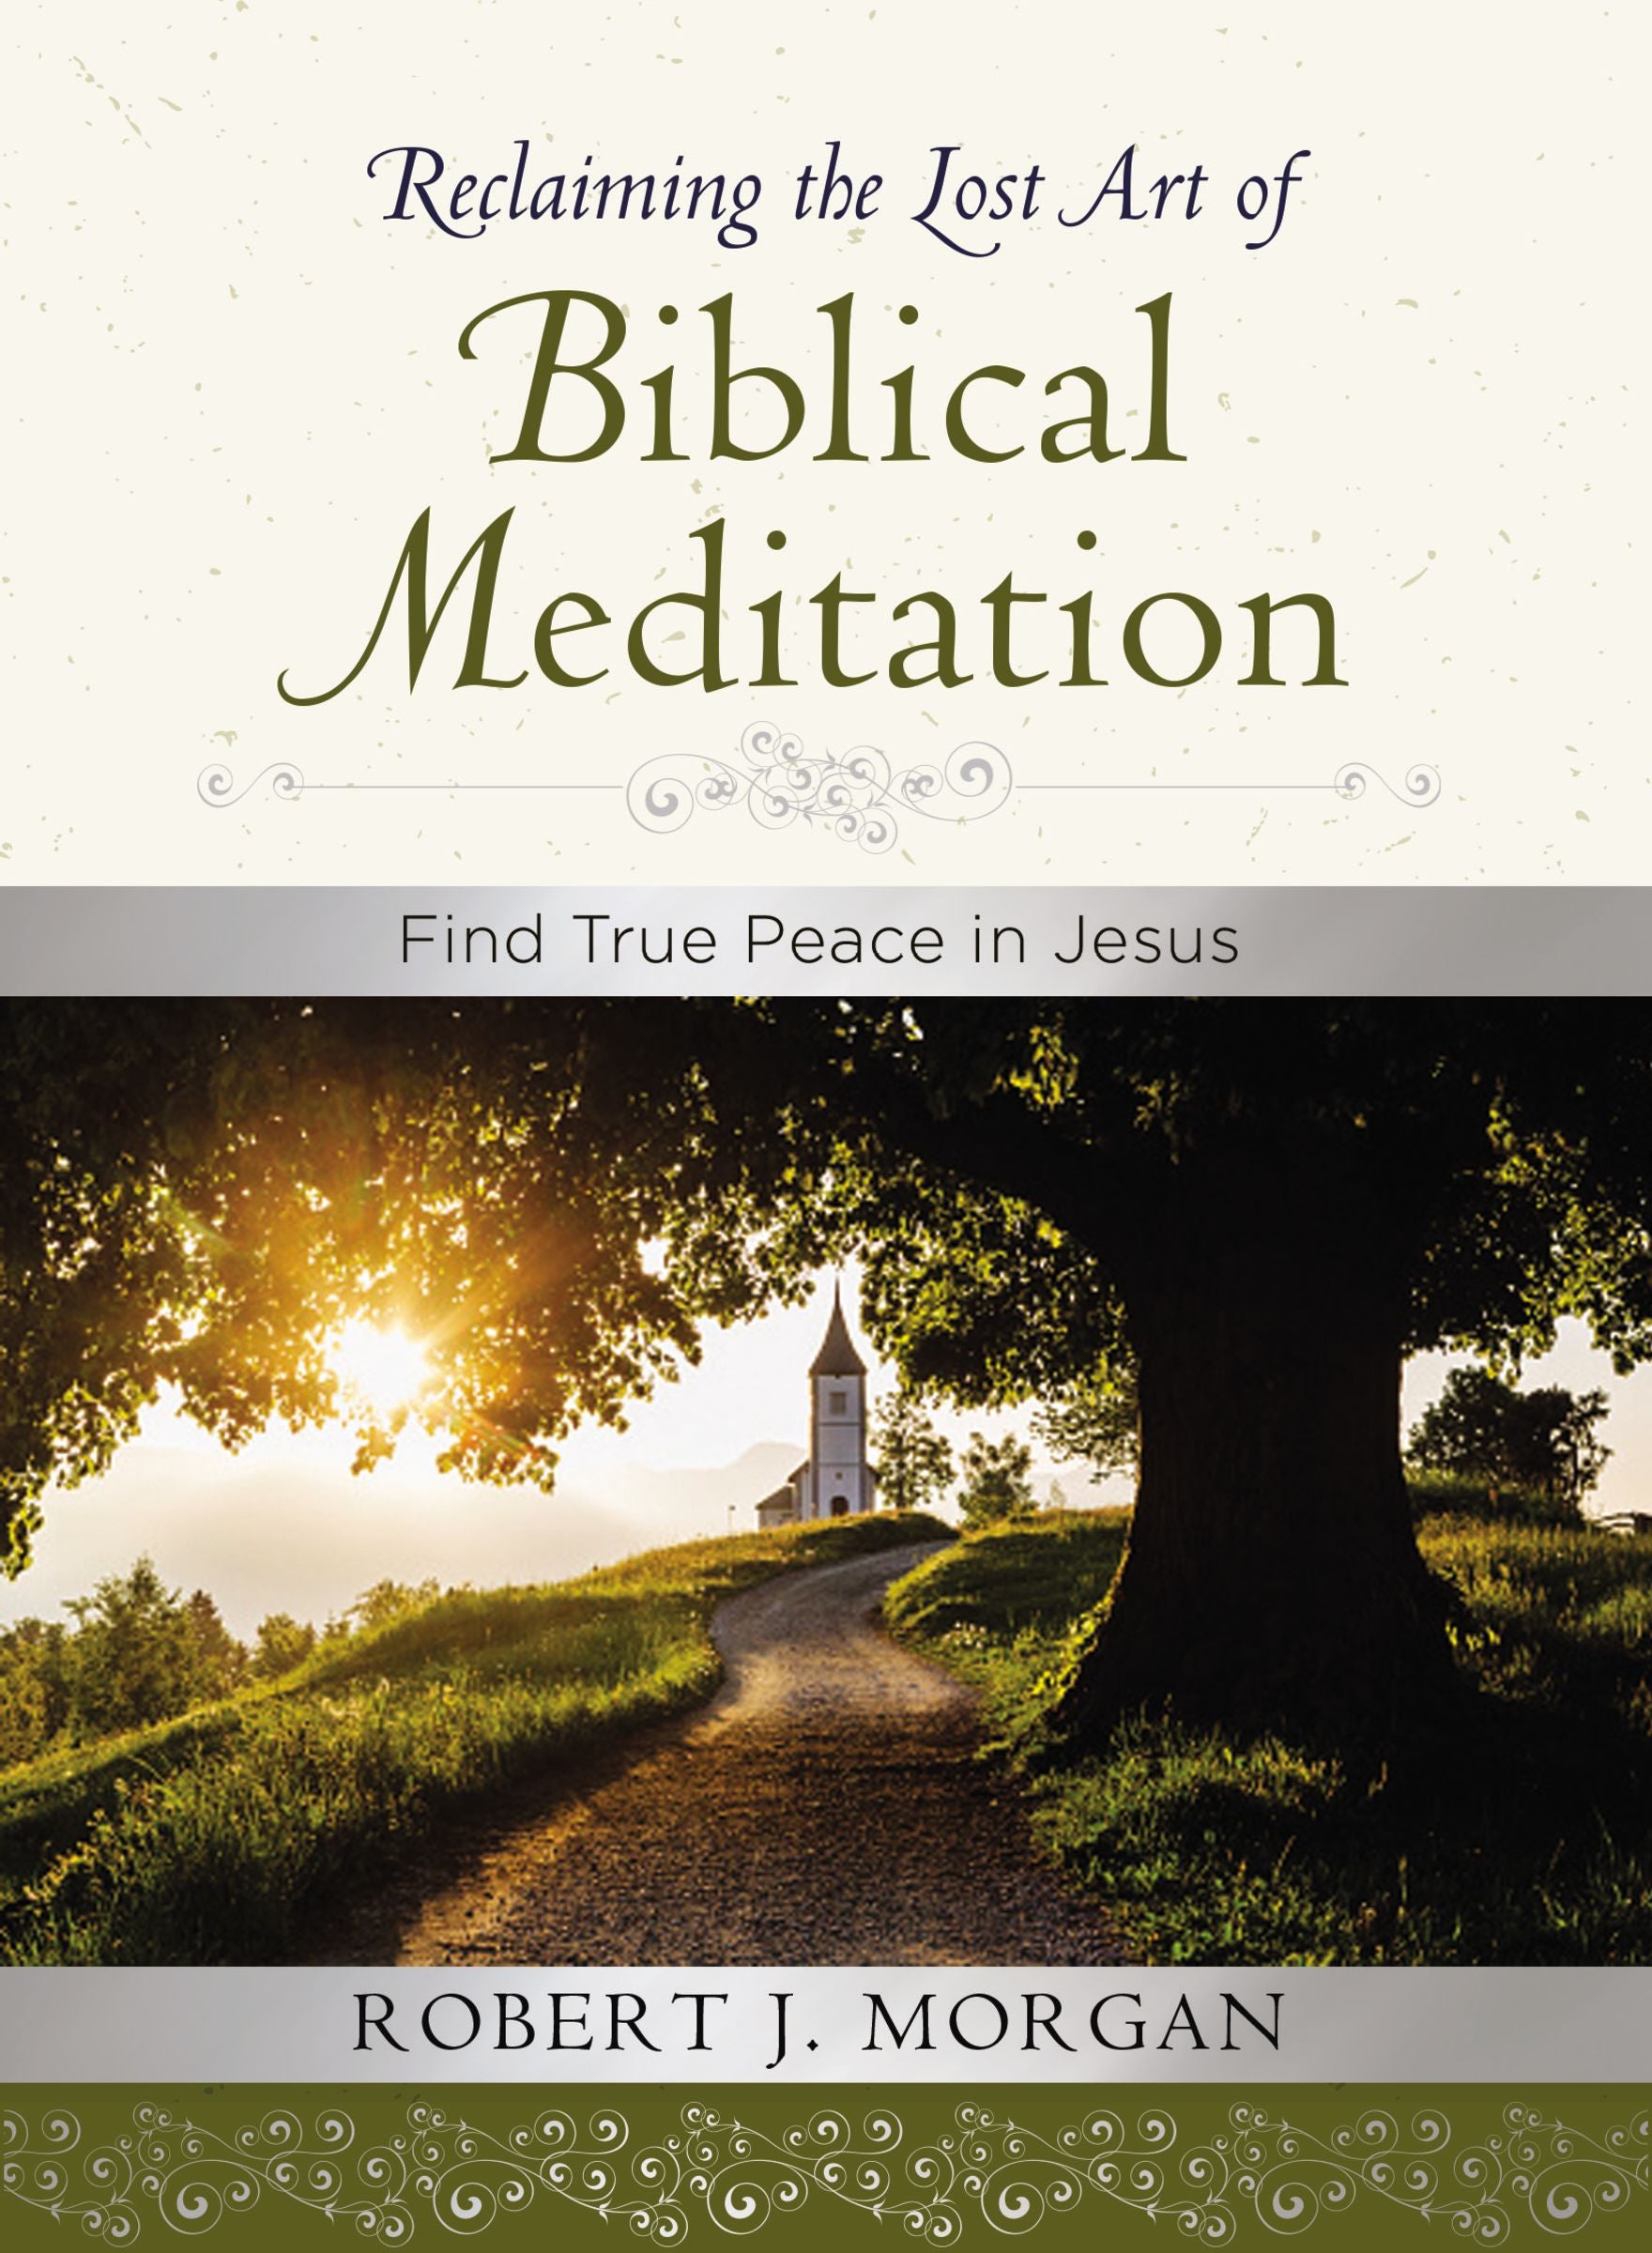 Image of Reclaiming the Lost Art of Biblical Meditation other